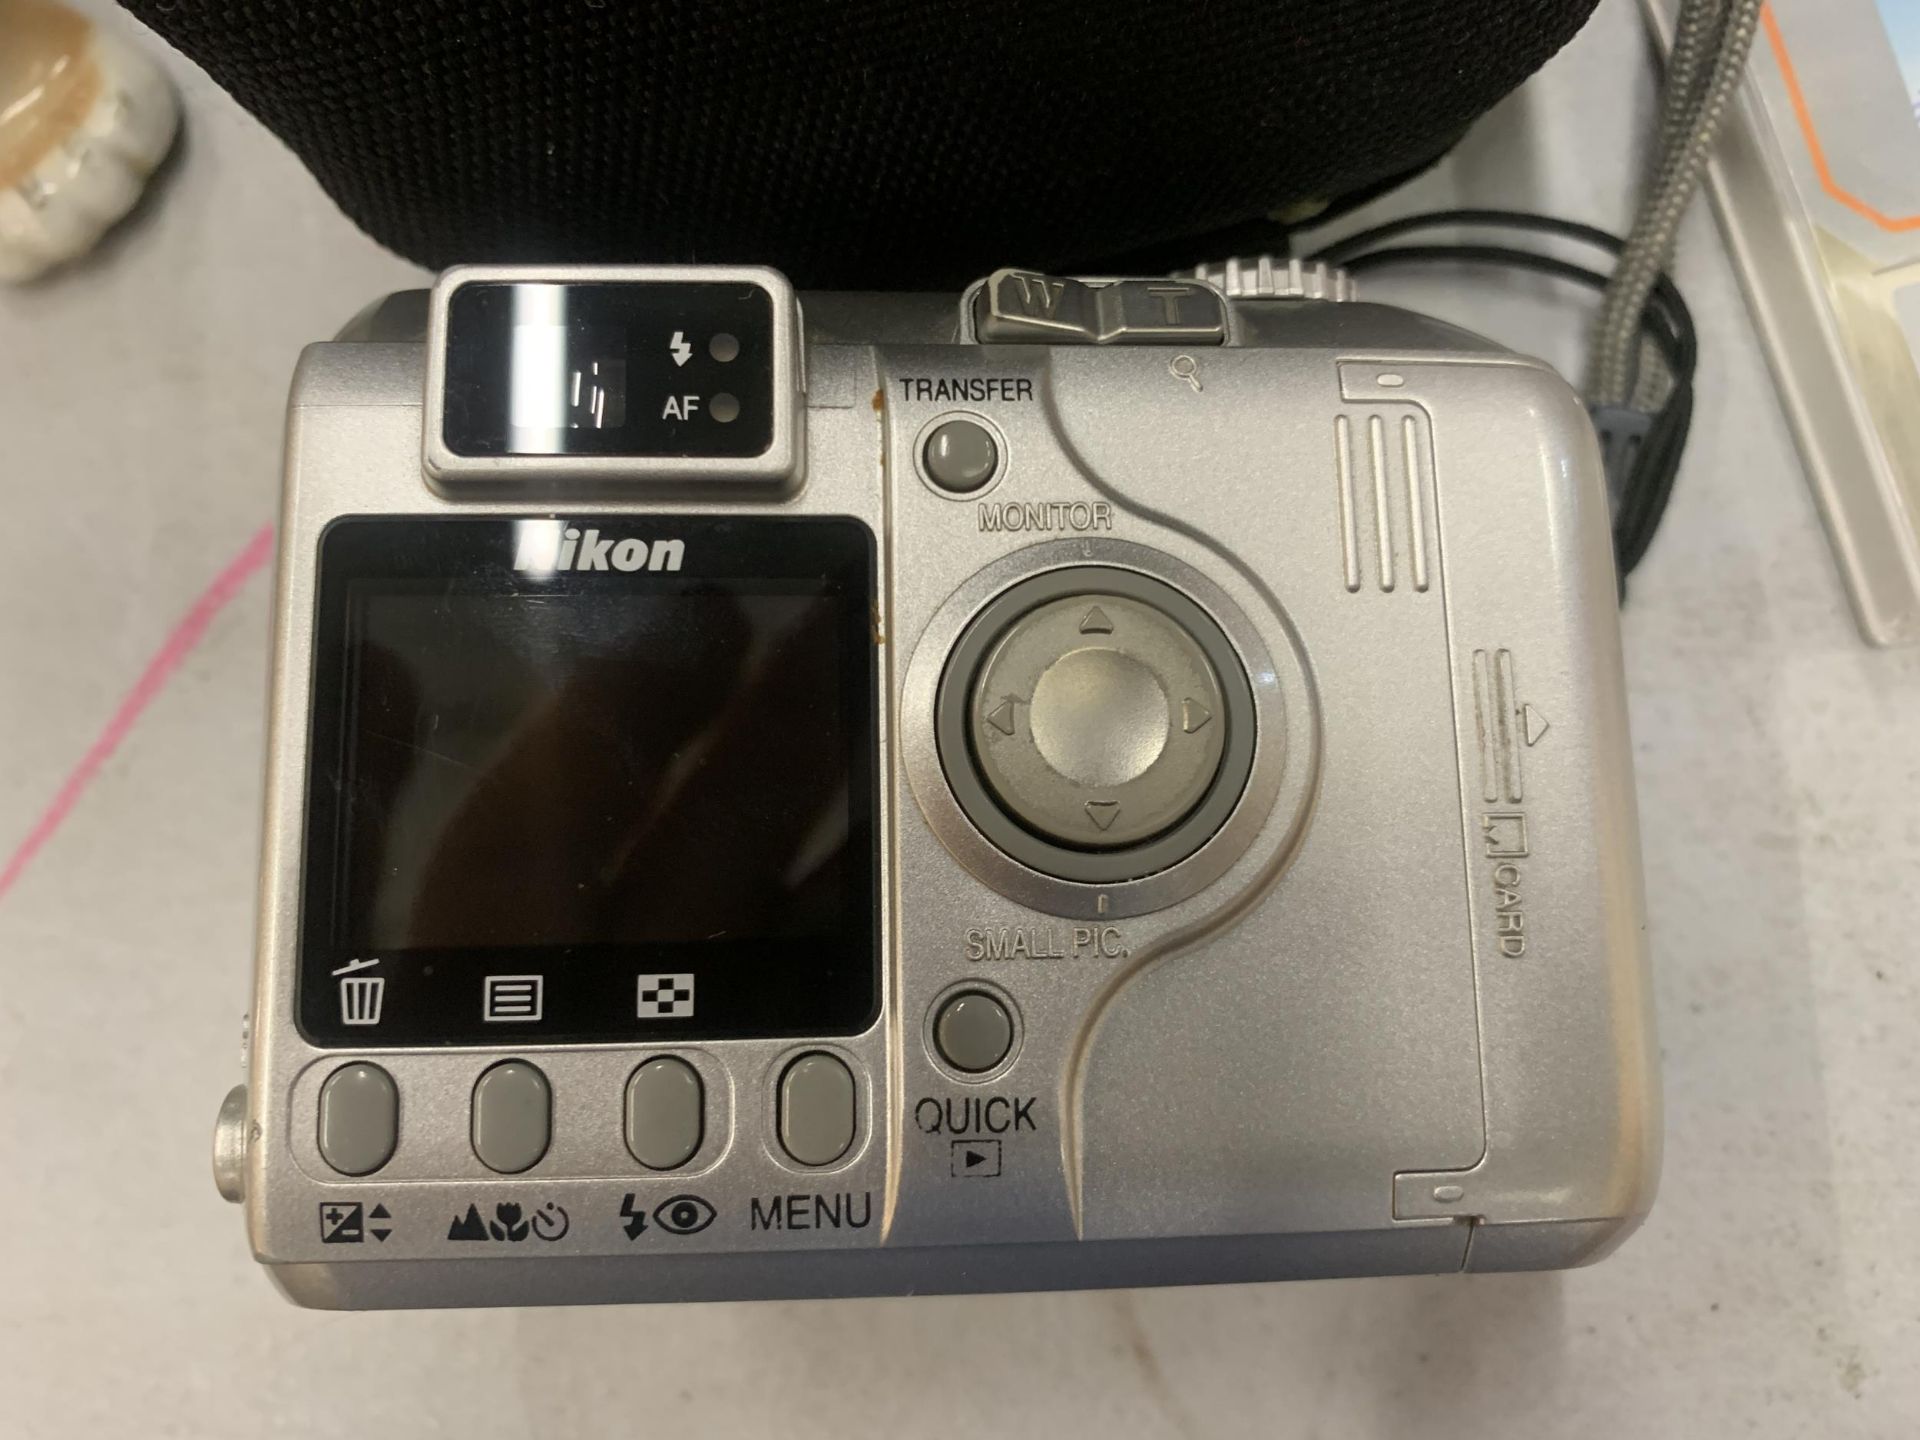 A NIKON COOLPIX 4300 CAMERA WITH CASE AND ACCESSORIES - Image 4 of 4